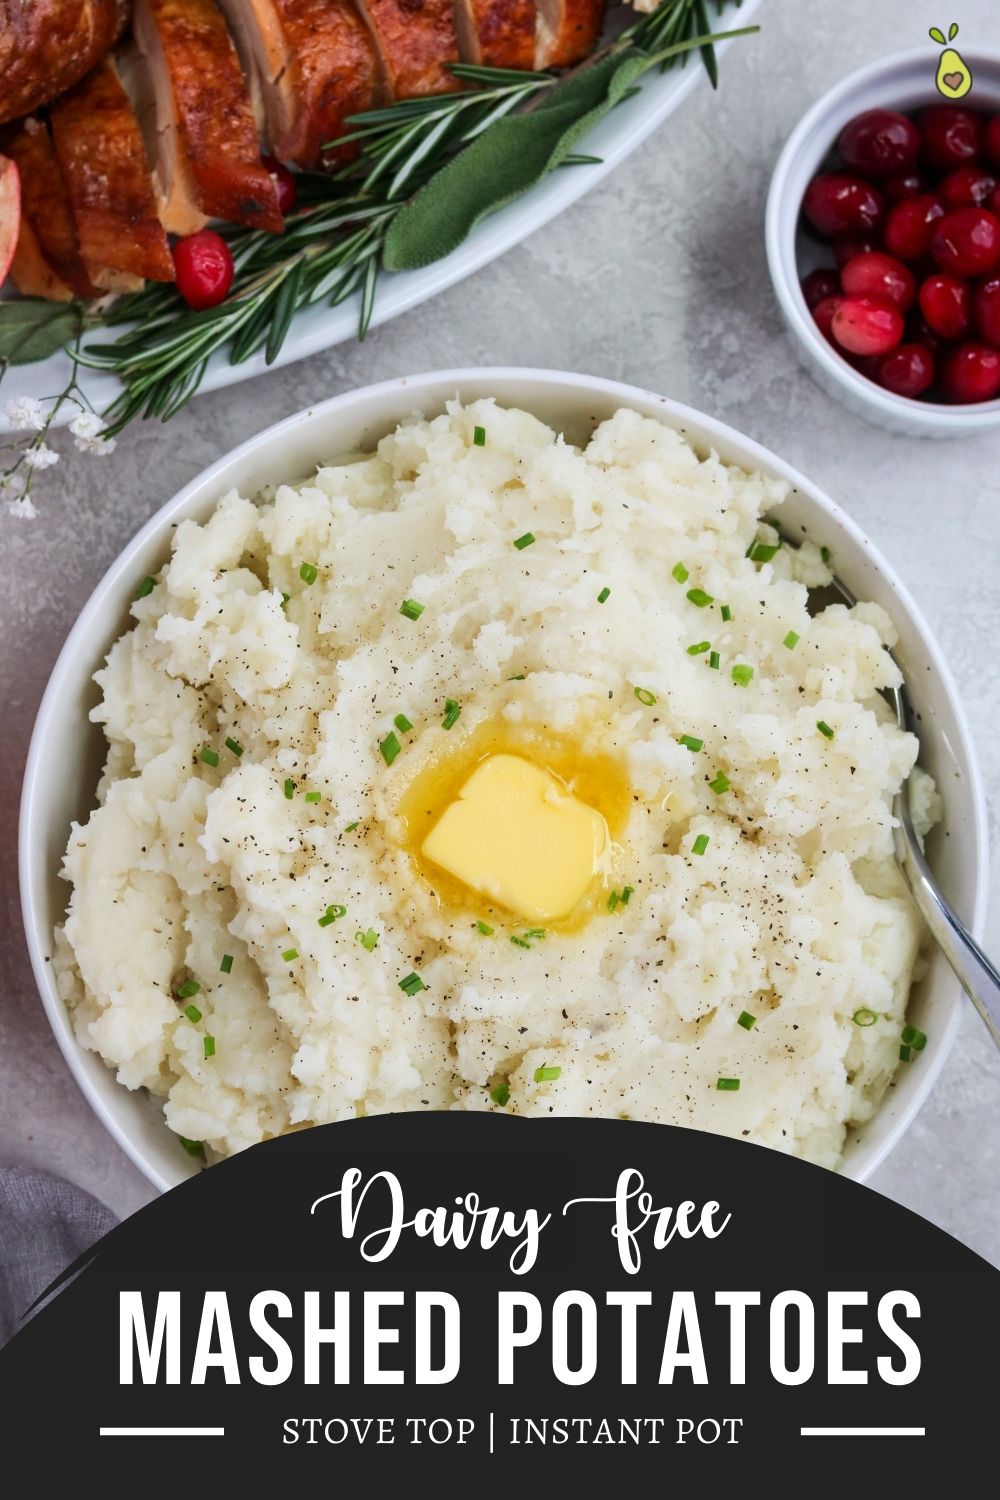 Dairy Free Mashed Potatoes with vegan butter - Pinterest pin